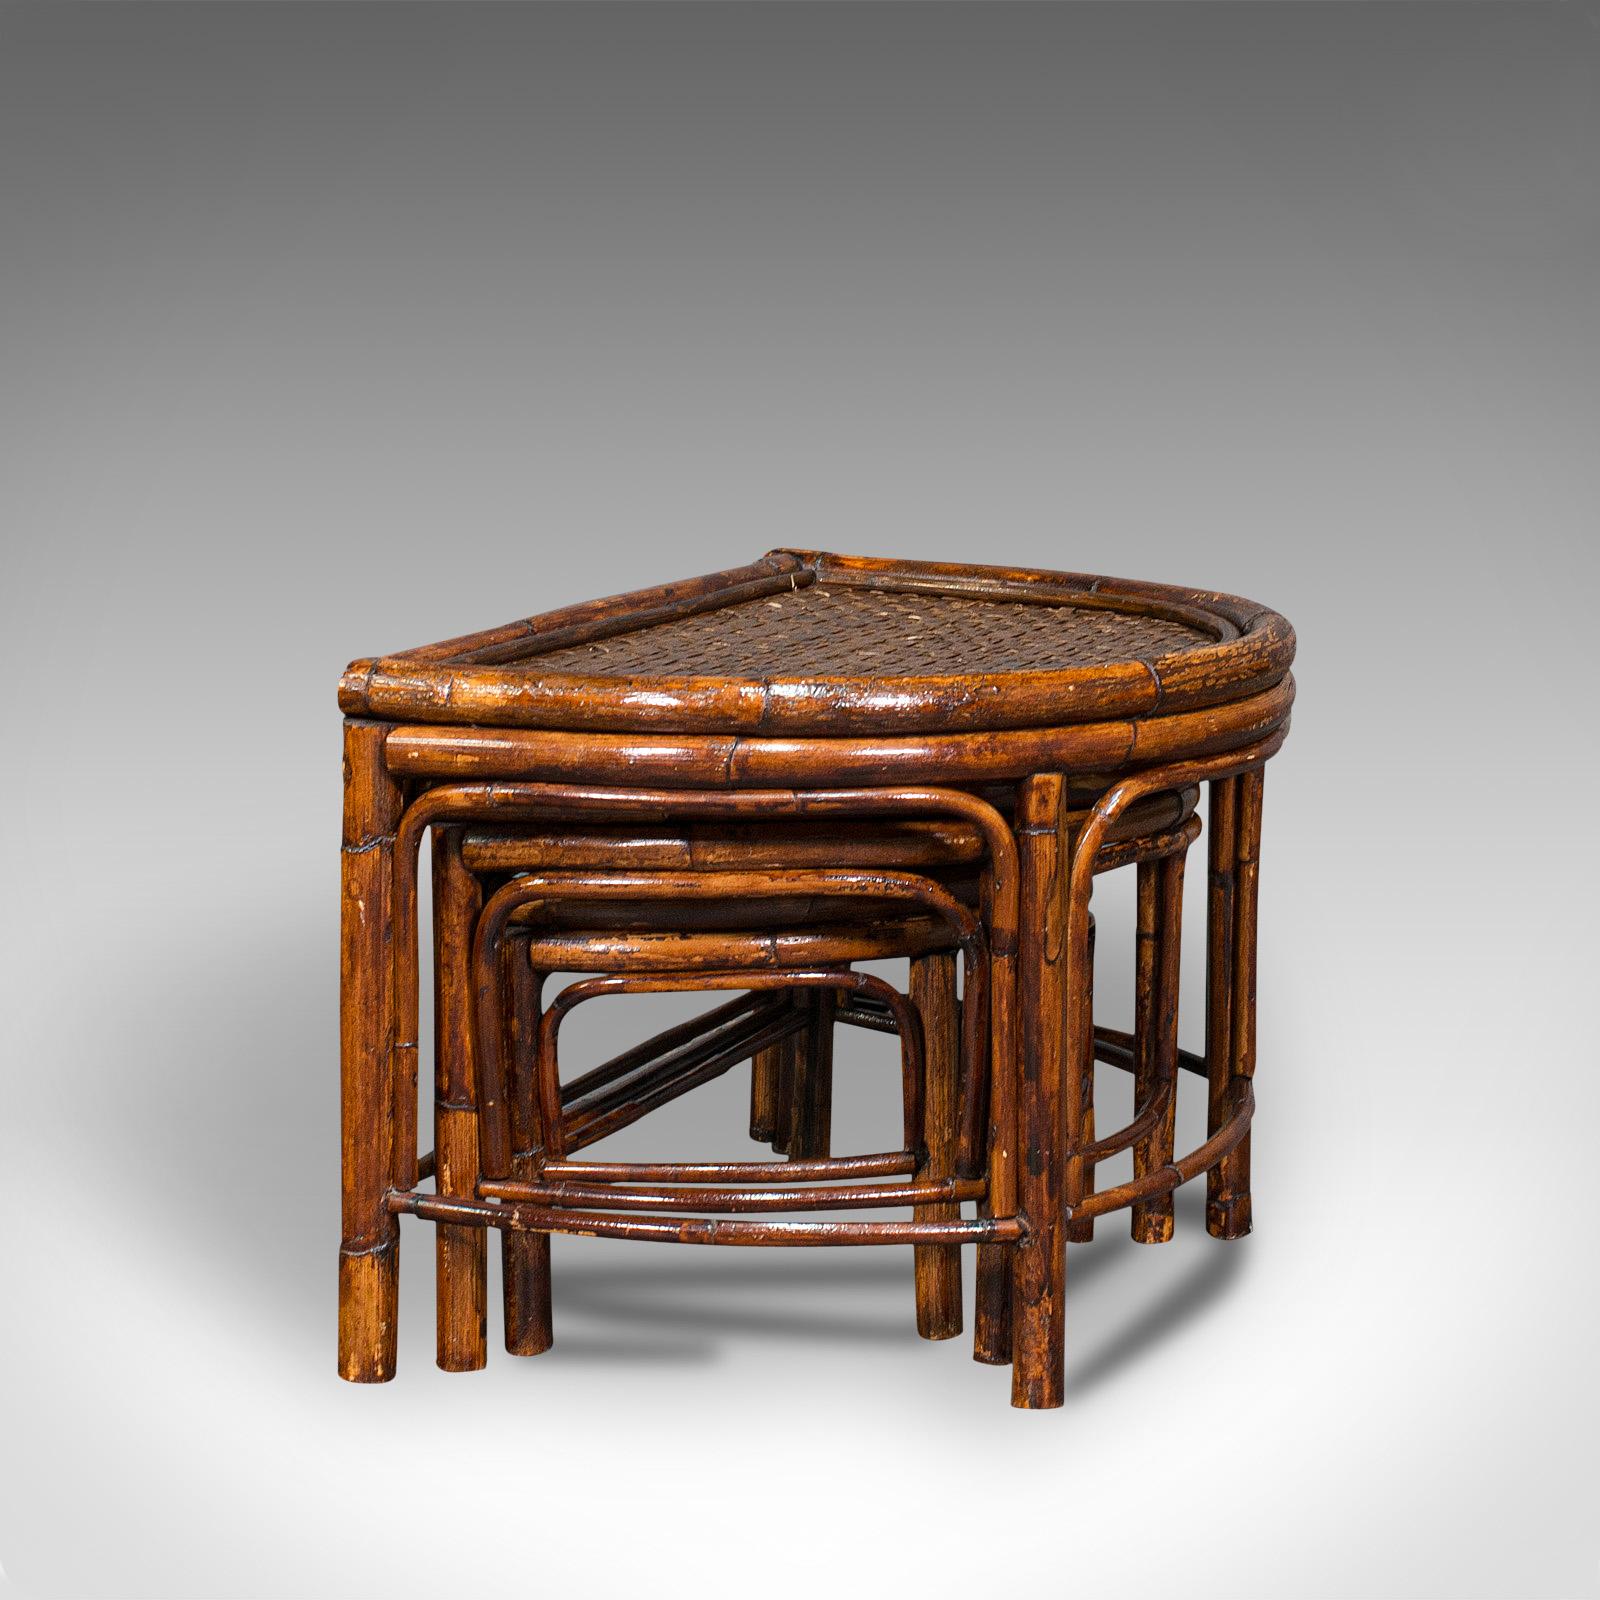 This is an antique set of nesting tables. An Oriental, bamboo and rattan occasional side table, dating to the Edwardian period, circa 1910.

Compact nesting tables with a charming appearance
Displaying a desirable aged patina throughout
Bamboo